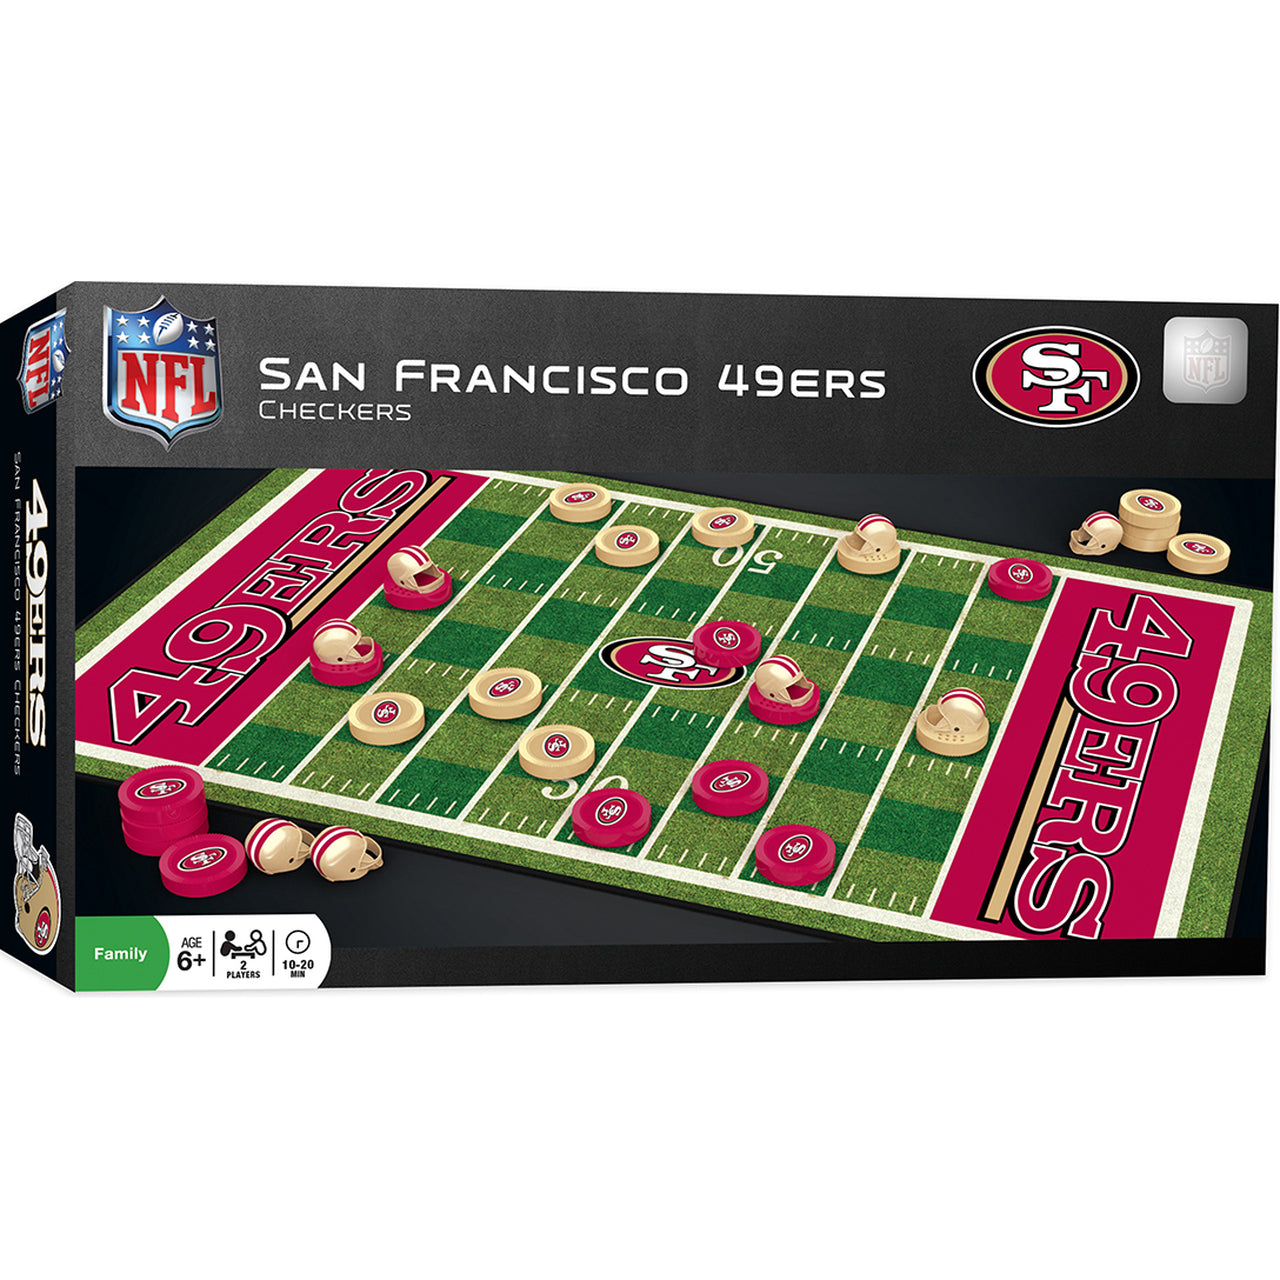 San Francisco 49ers Checkers Board Game by Masterpieces